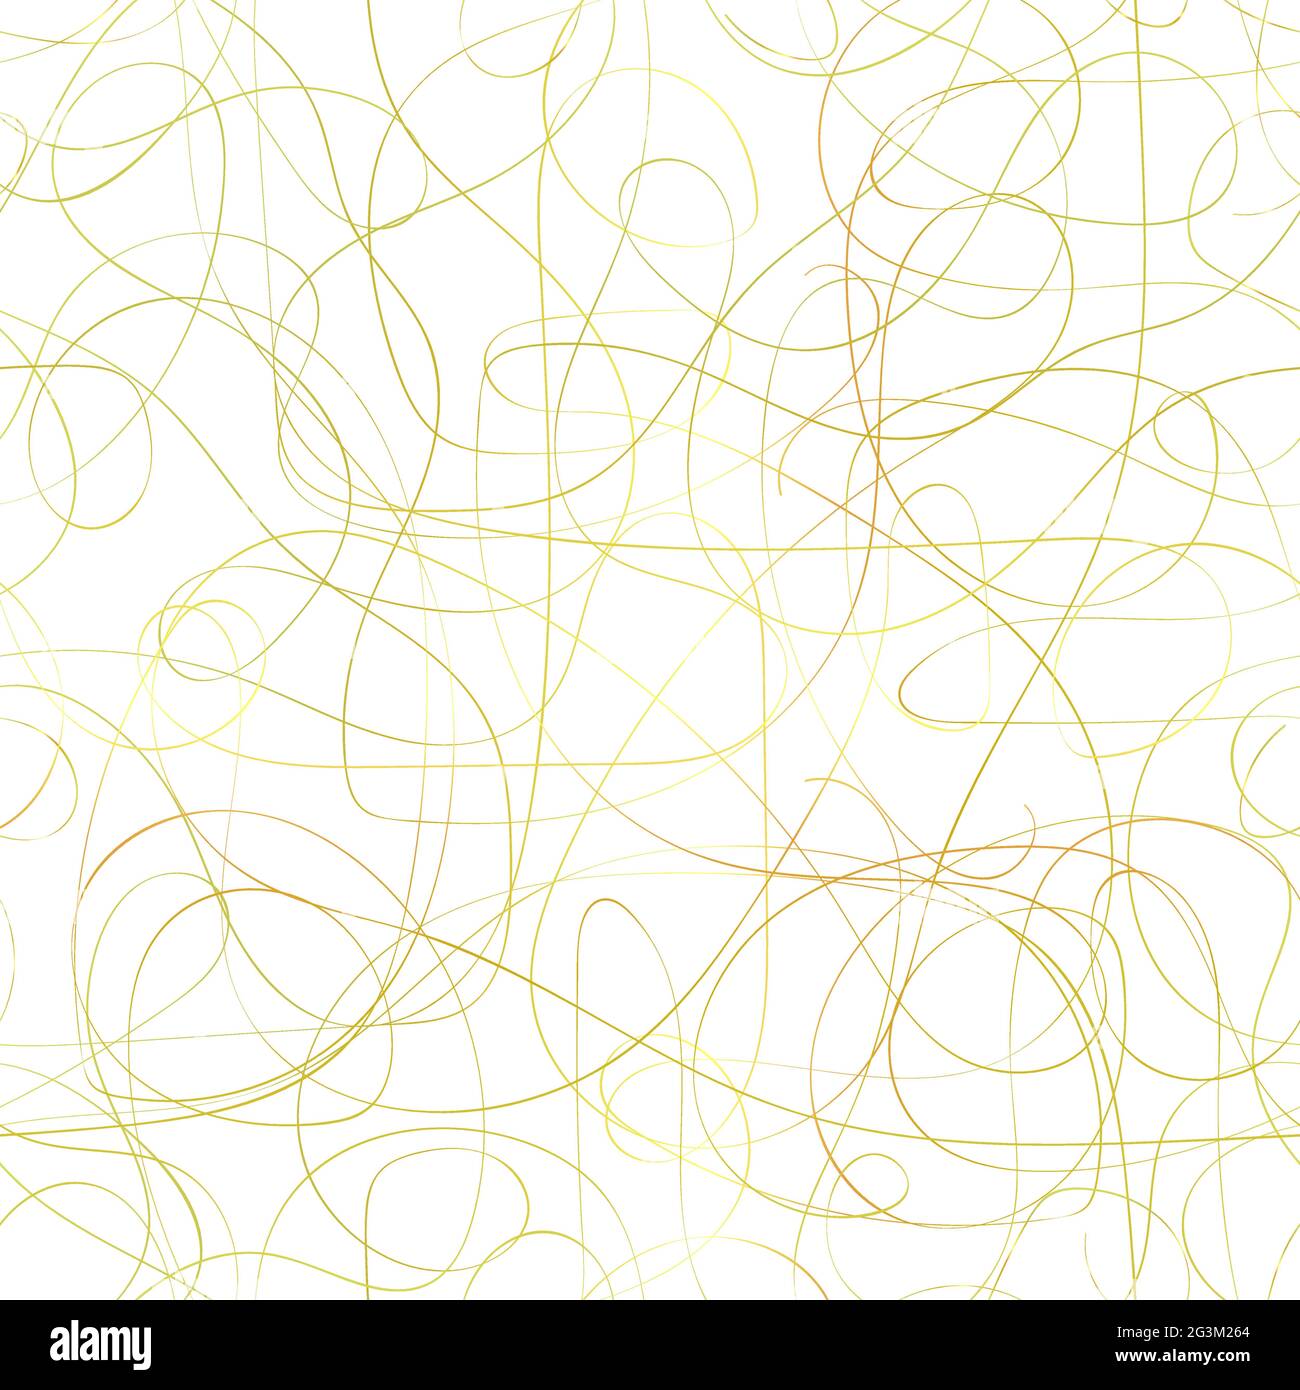 Seamless messy Golden pattern. Gold line with gradient bends and curls isolated on a white background. Vector abstract stock illustration with tangled Stock Vector